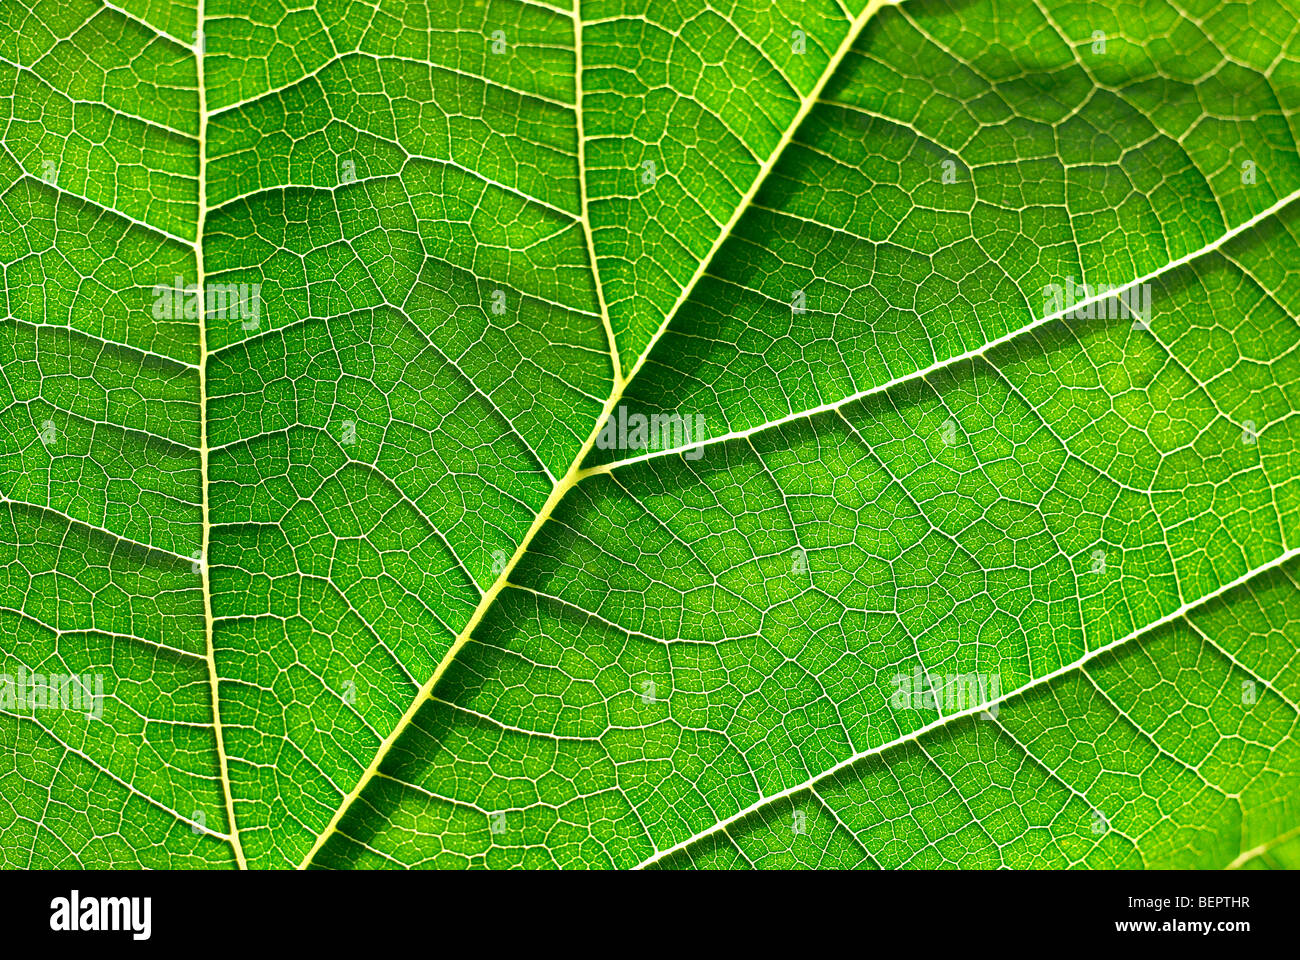 Mulberry leaf, green leaf, green, leaf, veins, macro, close-up, close up, earth Stock Photo